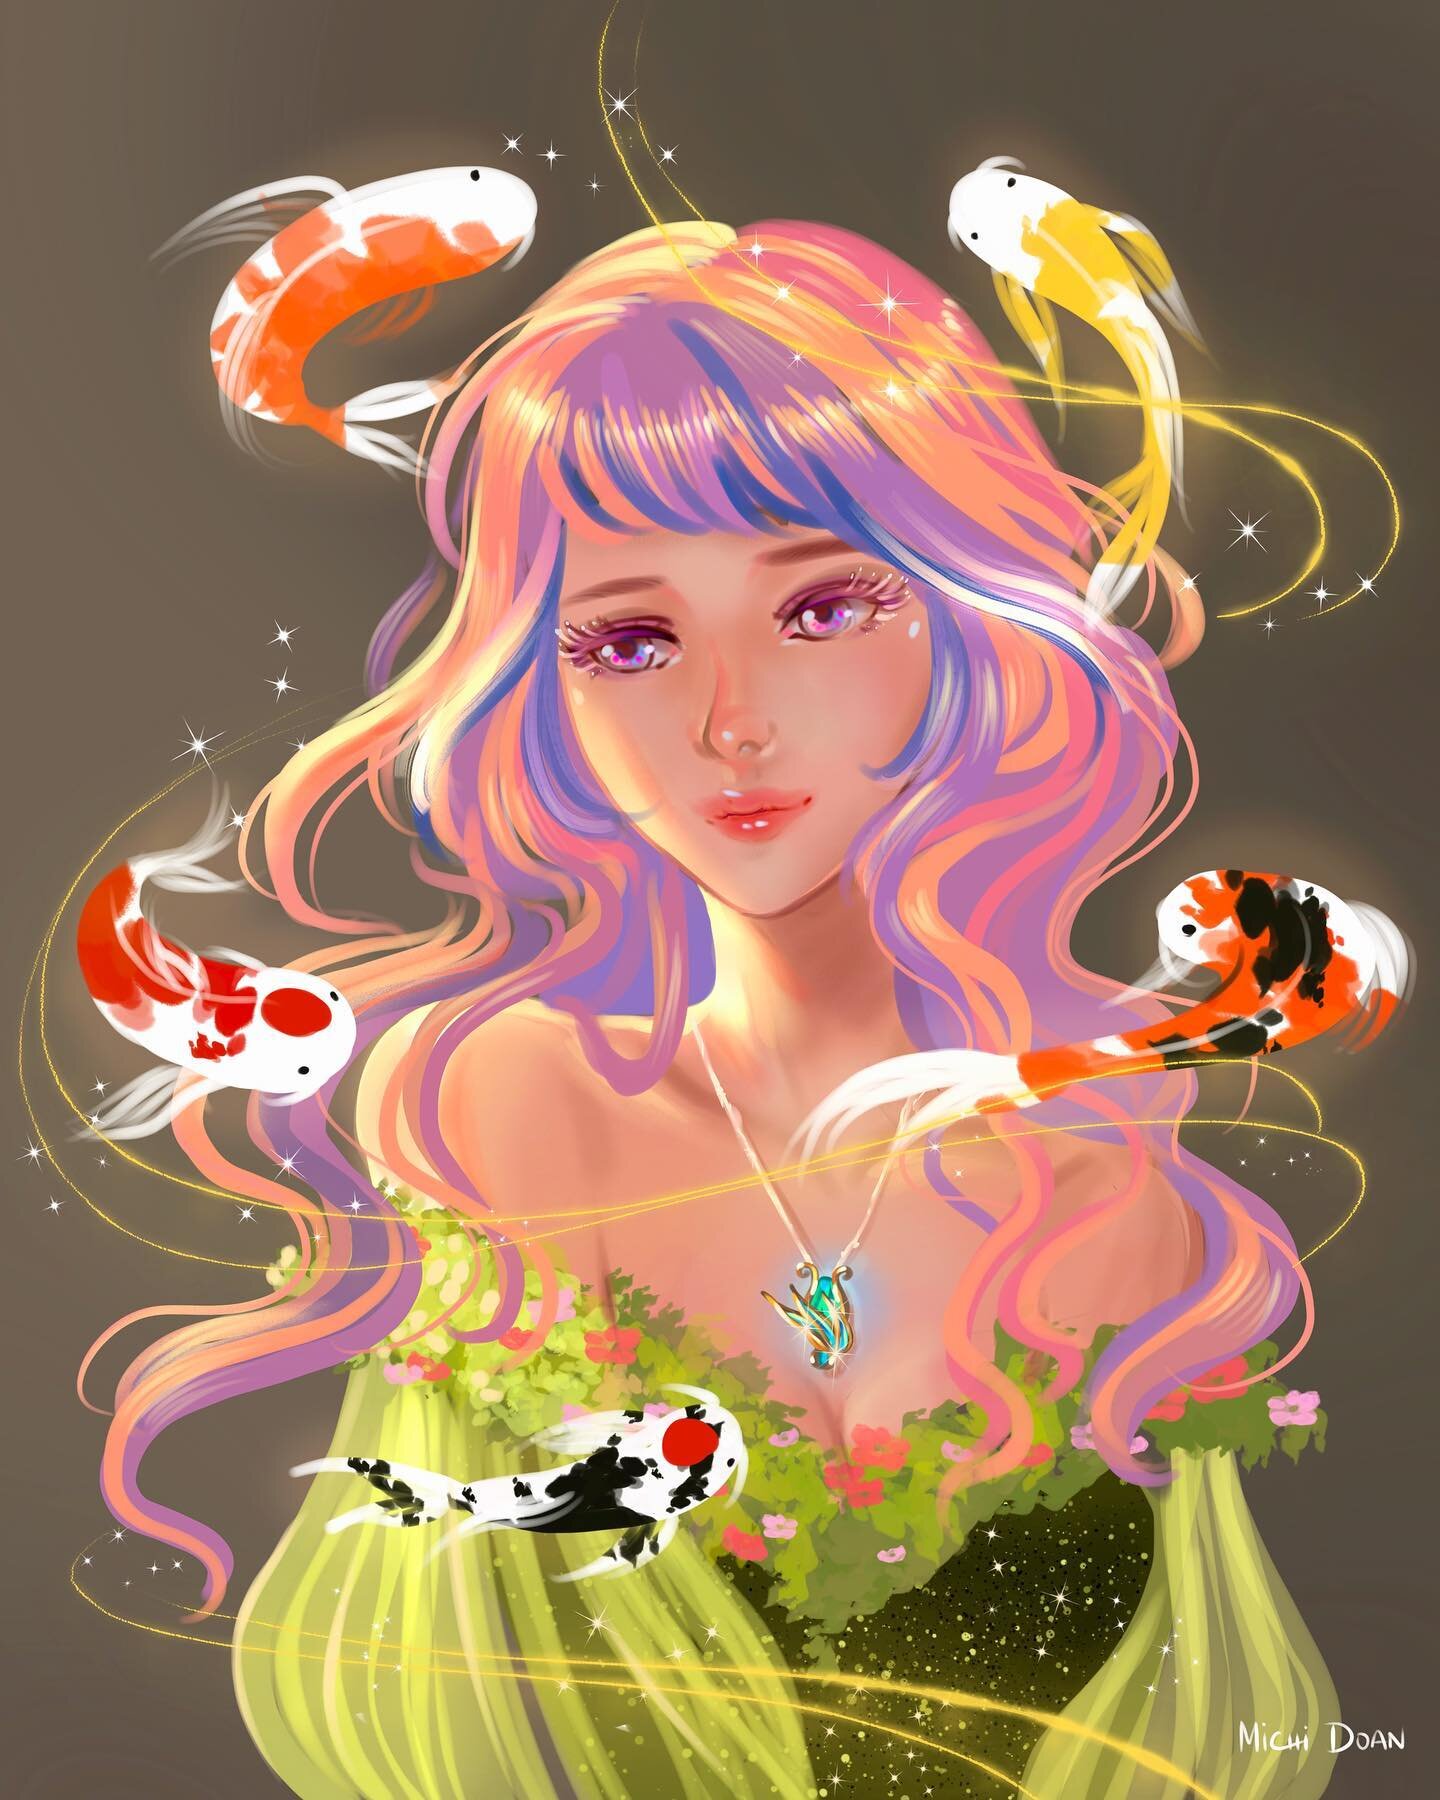 Illustration 34, Koi's Magic Recreation. About 1 &amp; 1/2 years ago, I drew a girl with koi fish. You can see the second slide of the old image. Now, with the same concept and idea, I recreate the piece and call this Koi's Magic. Each has it's own u